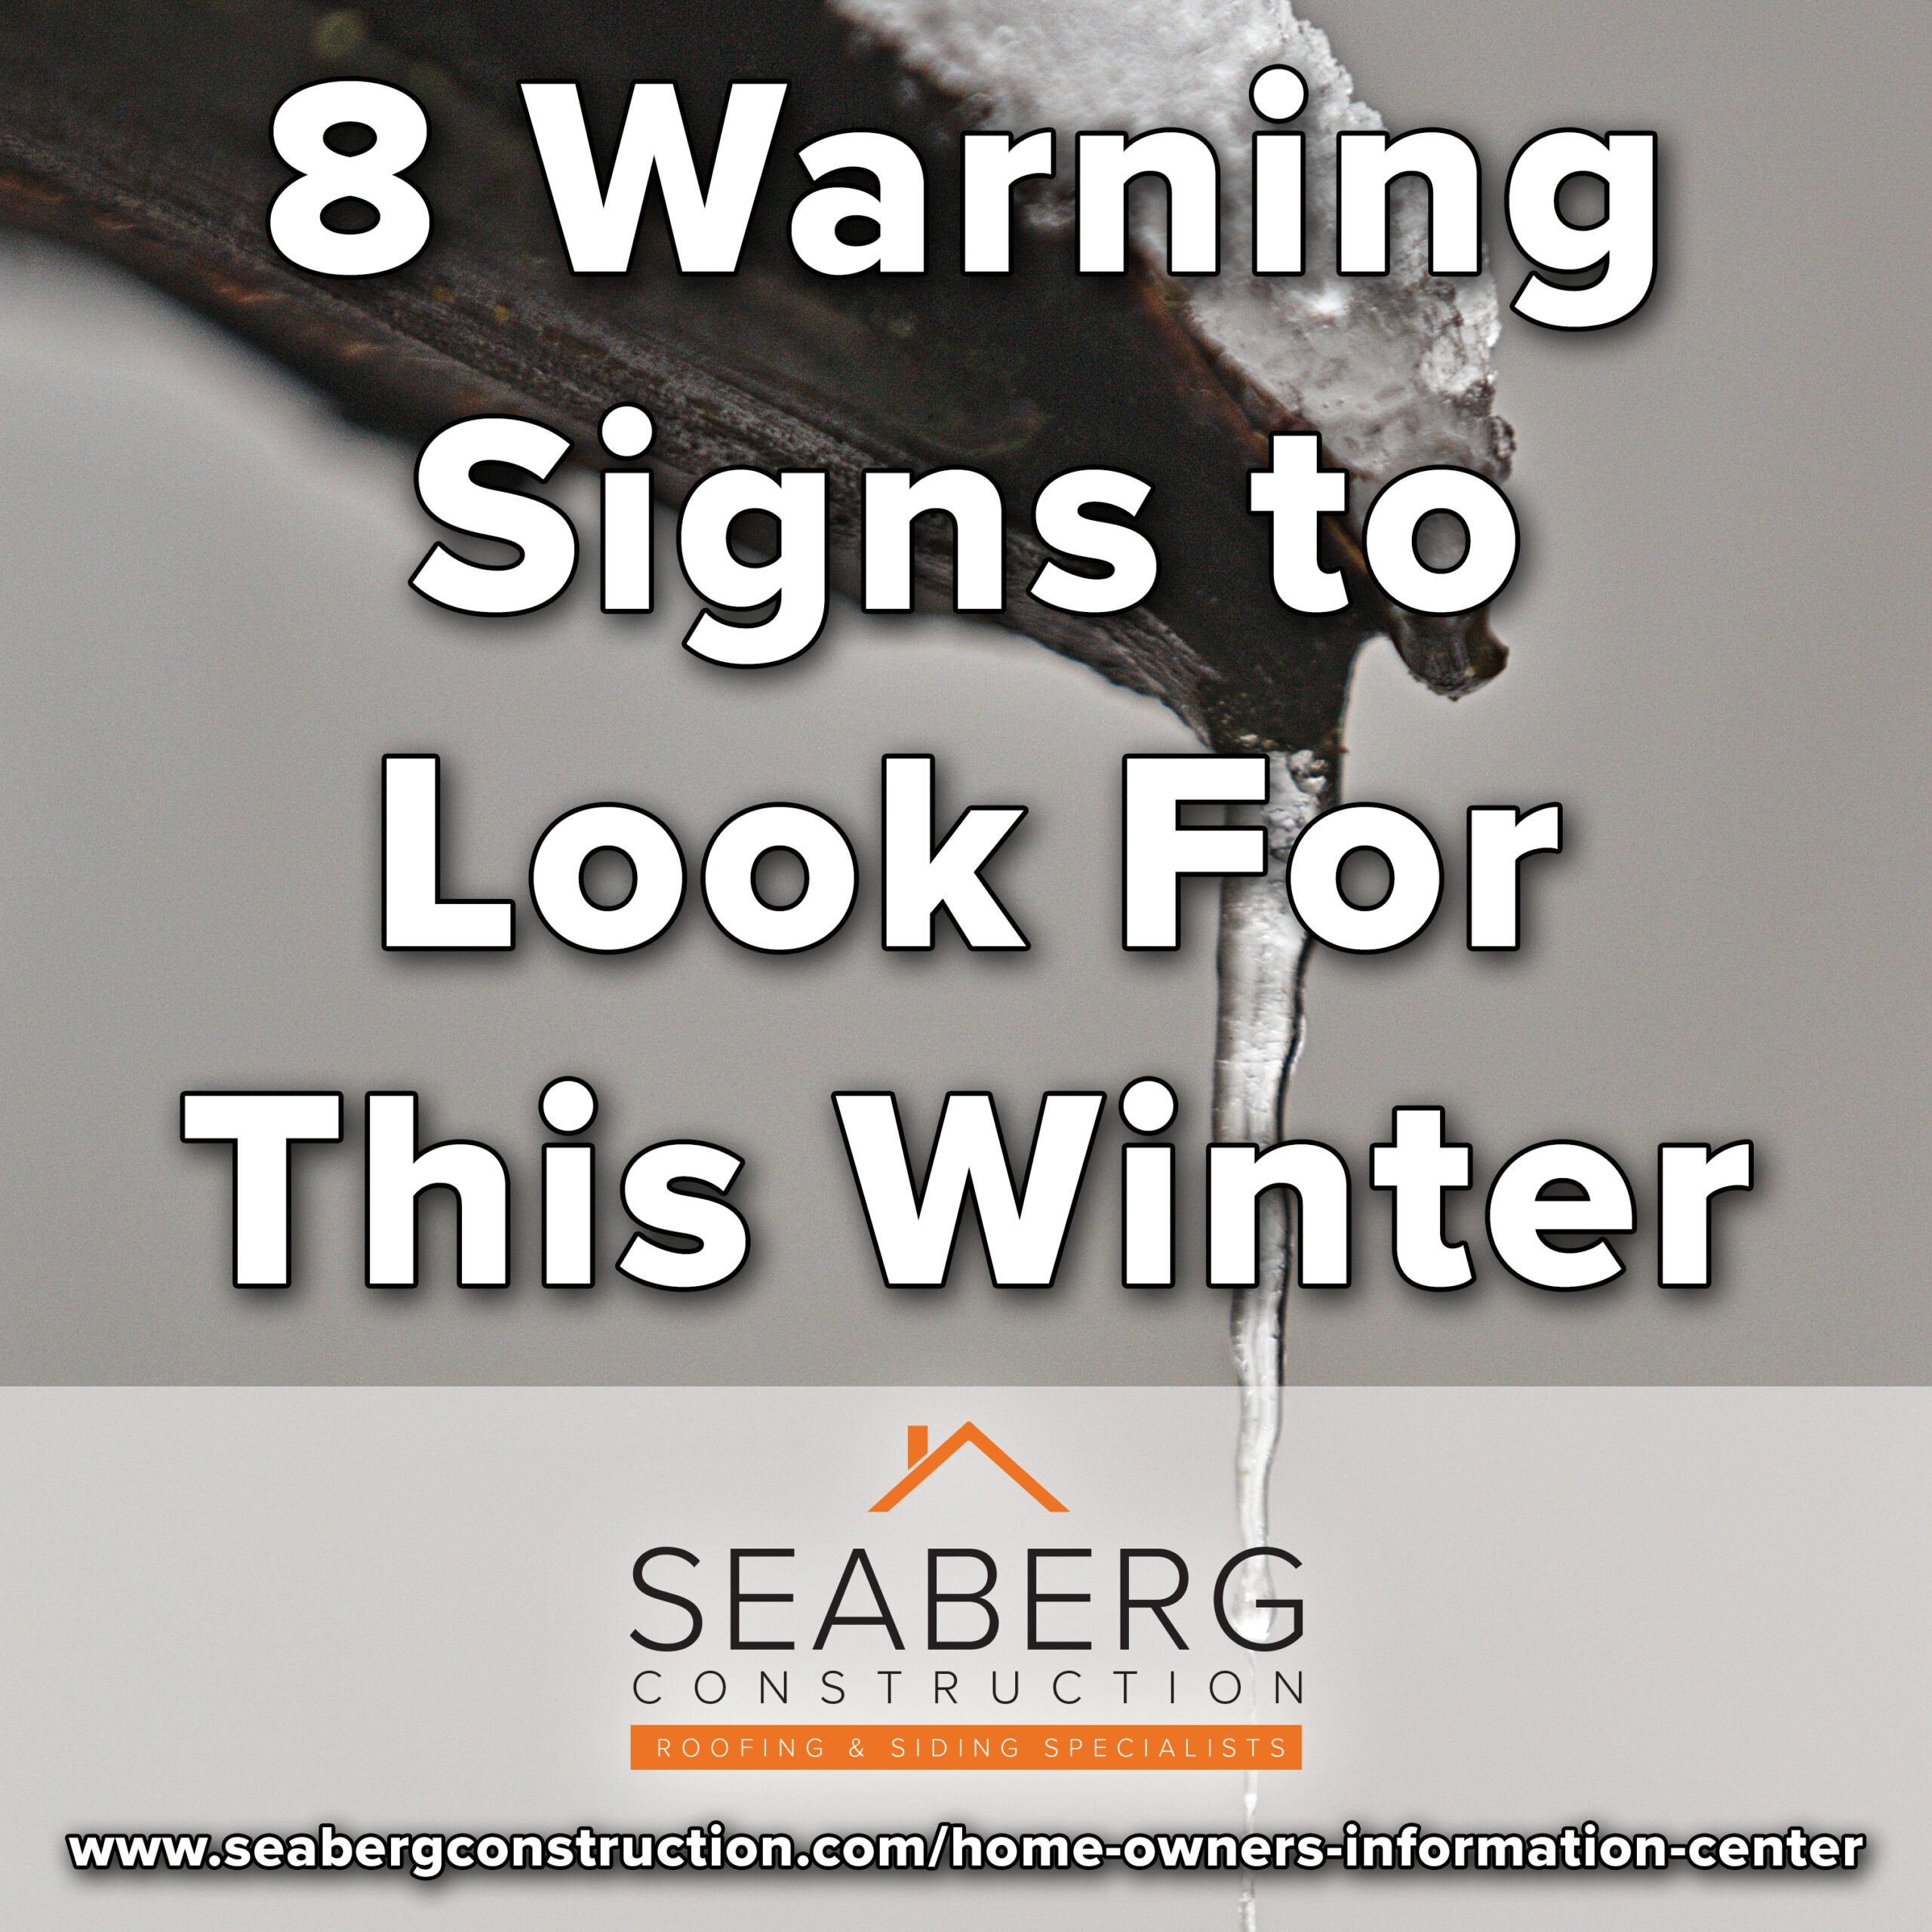 Roof Maintenance: 8 Warning Signs to Look For This Winter